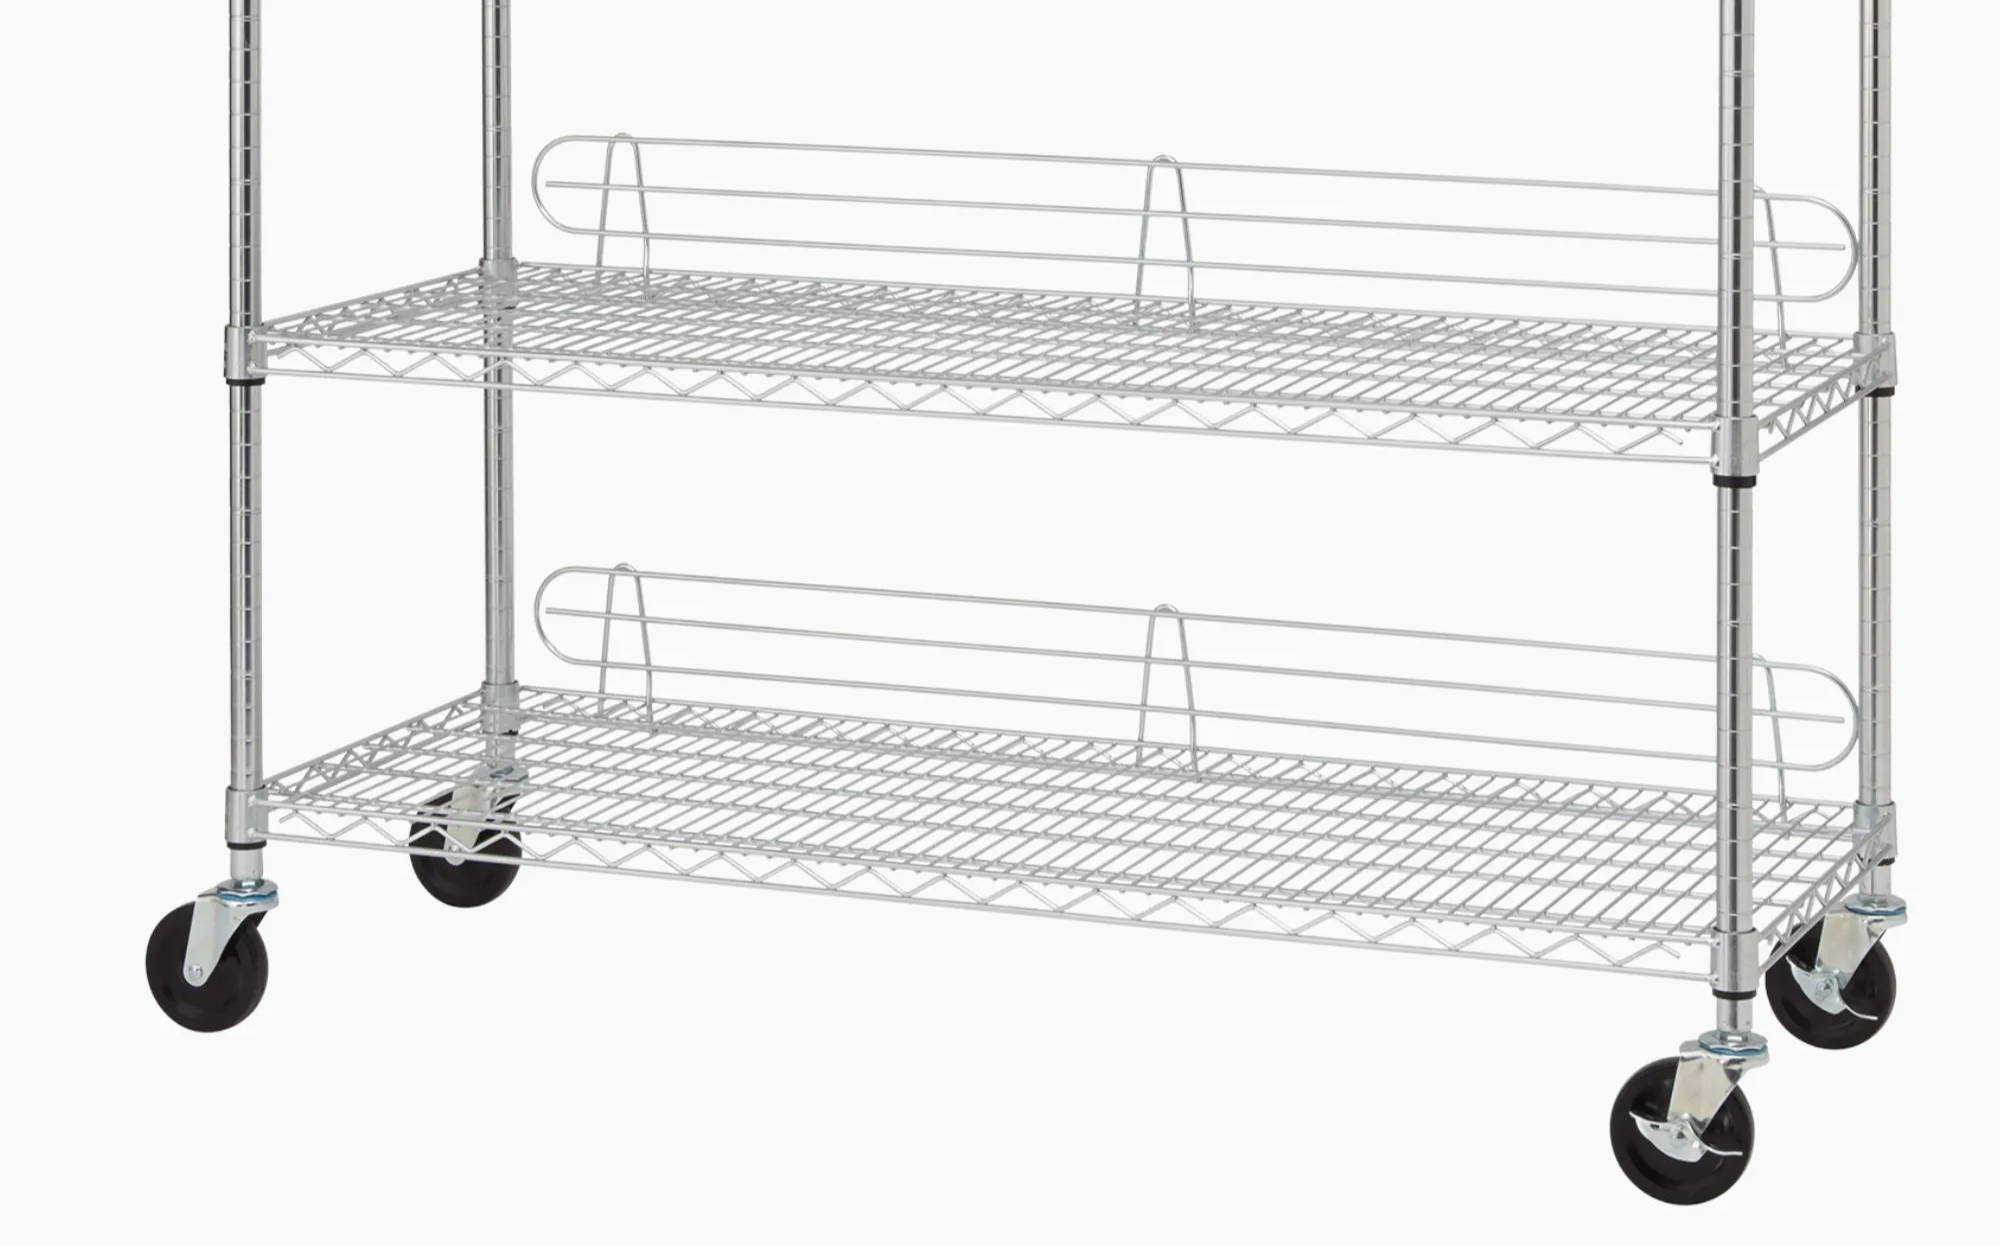 2 wire backstands on a shelving rack